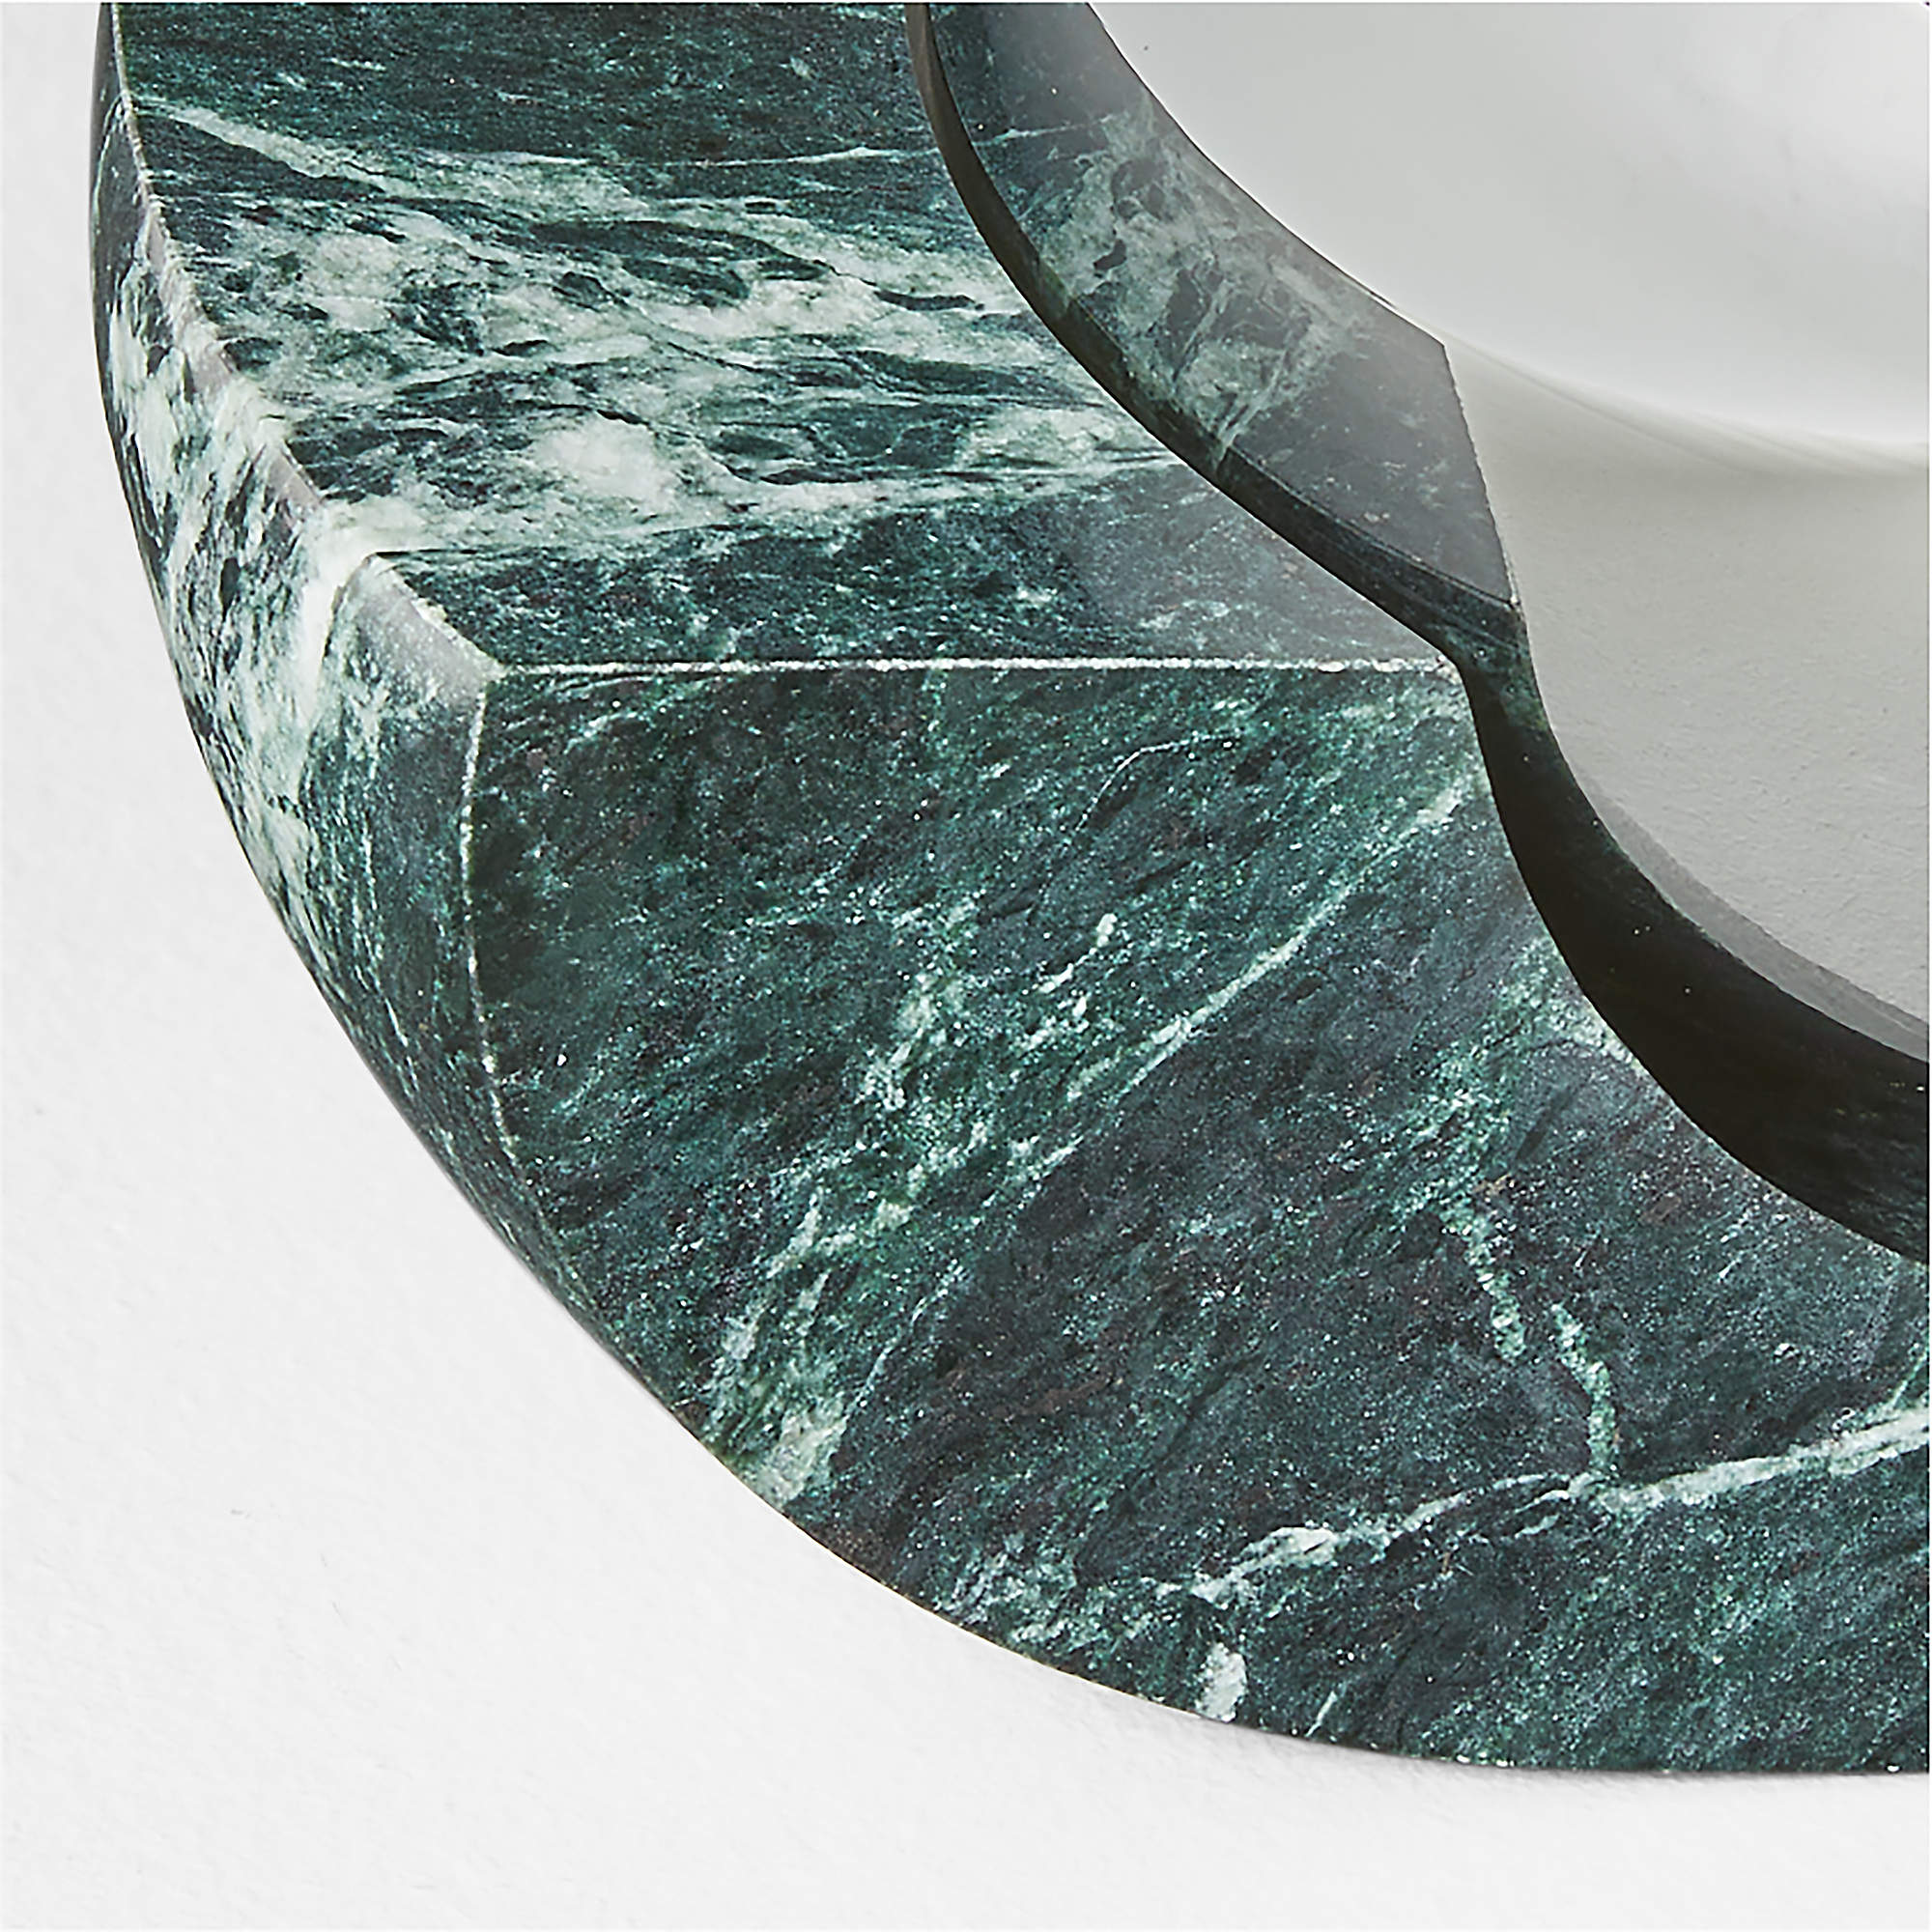 Neptune Green Marble Wall Sconce Light